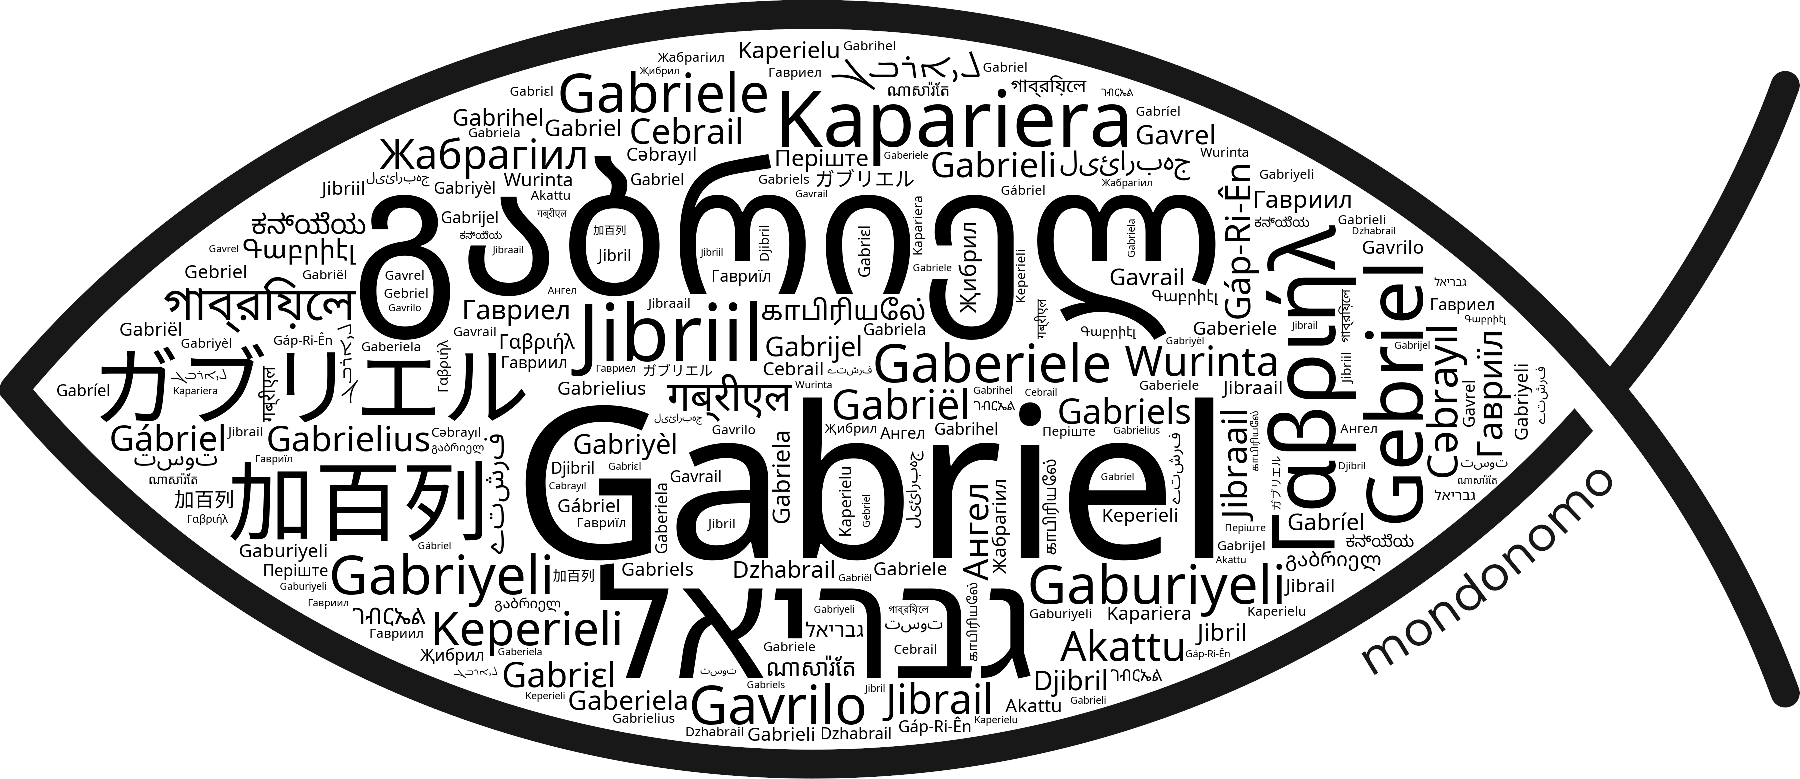 Name Gabriel in the world's Bibles